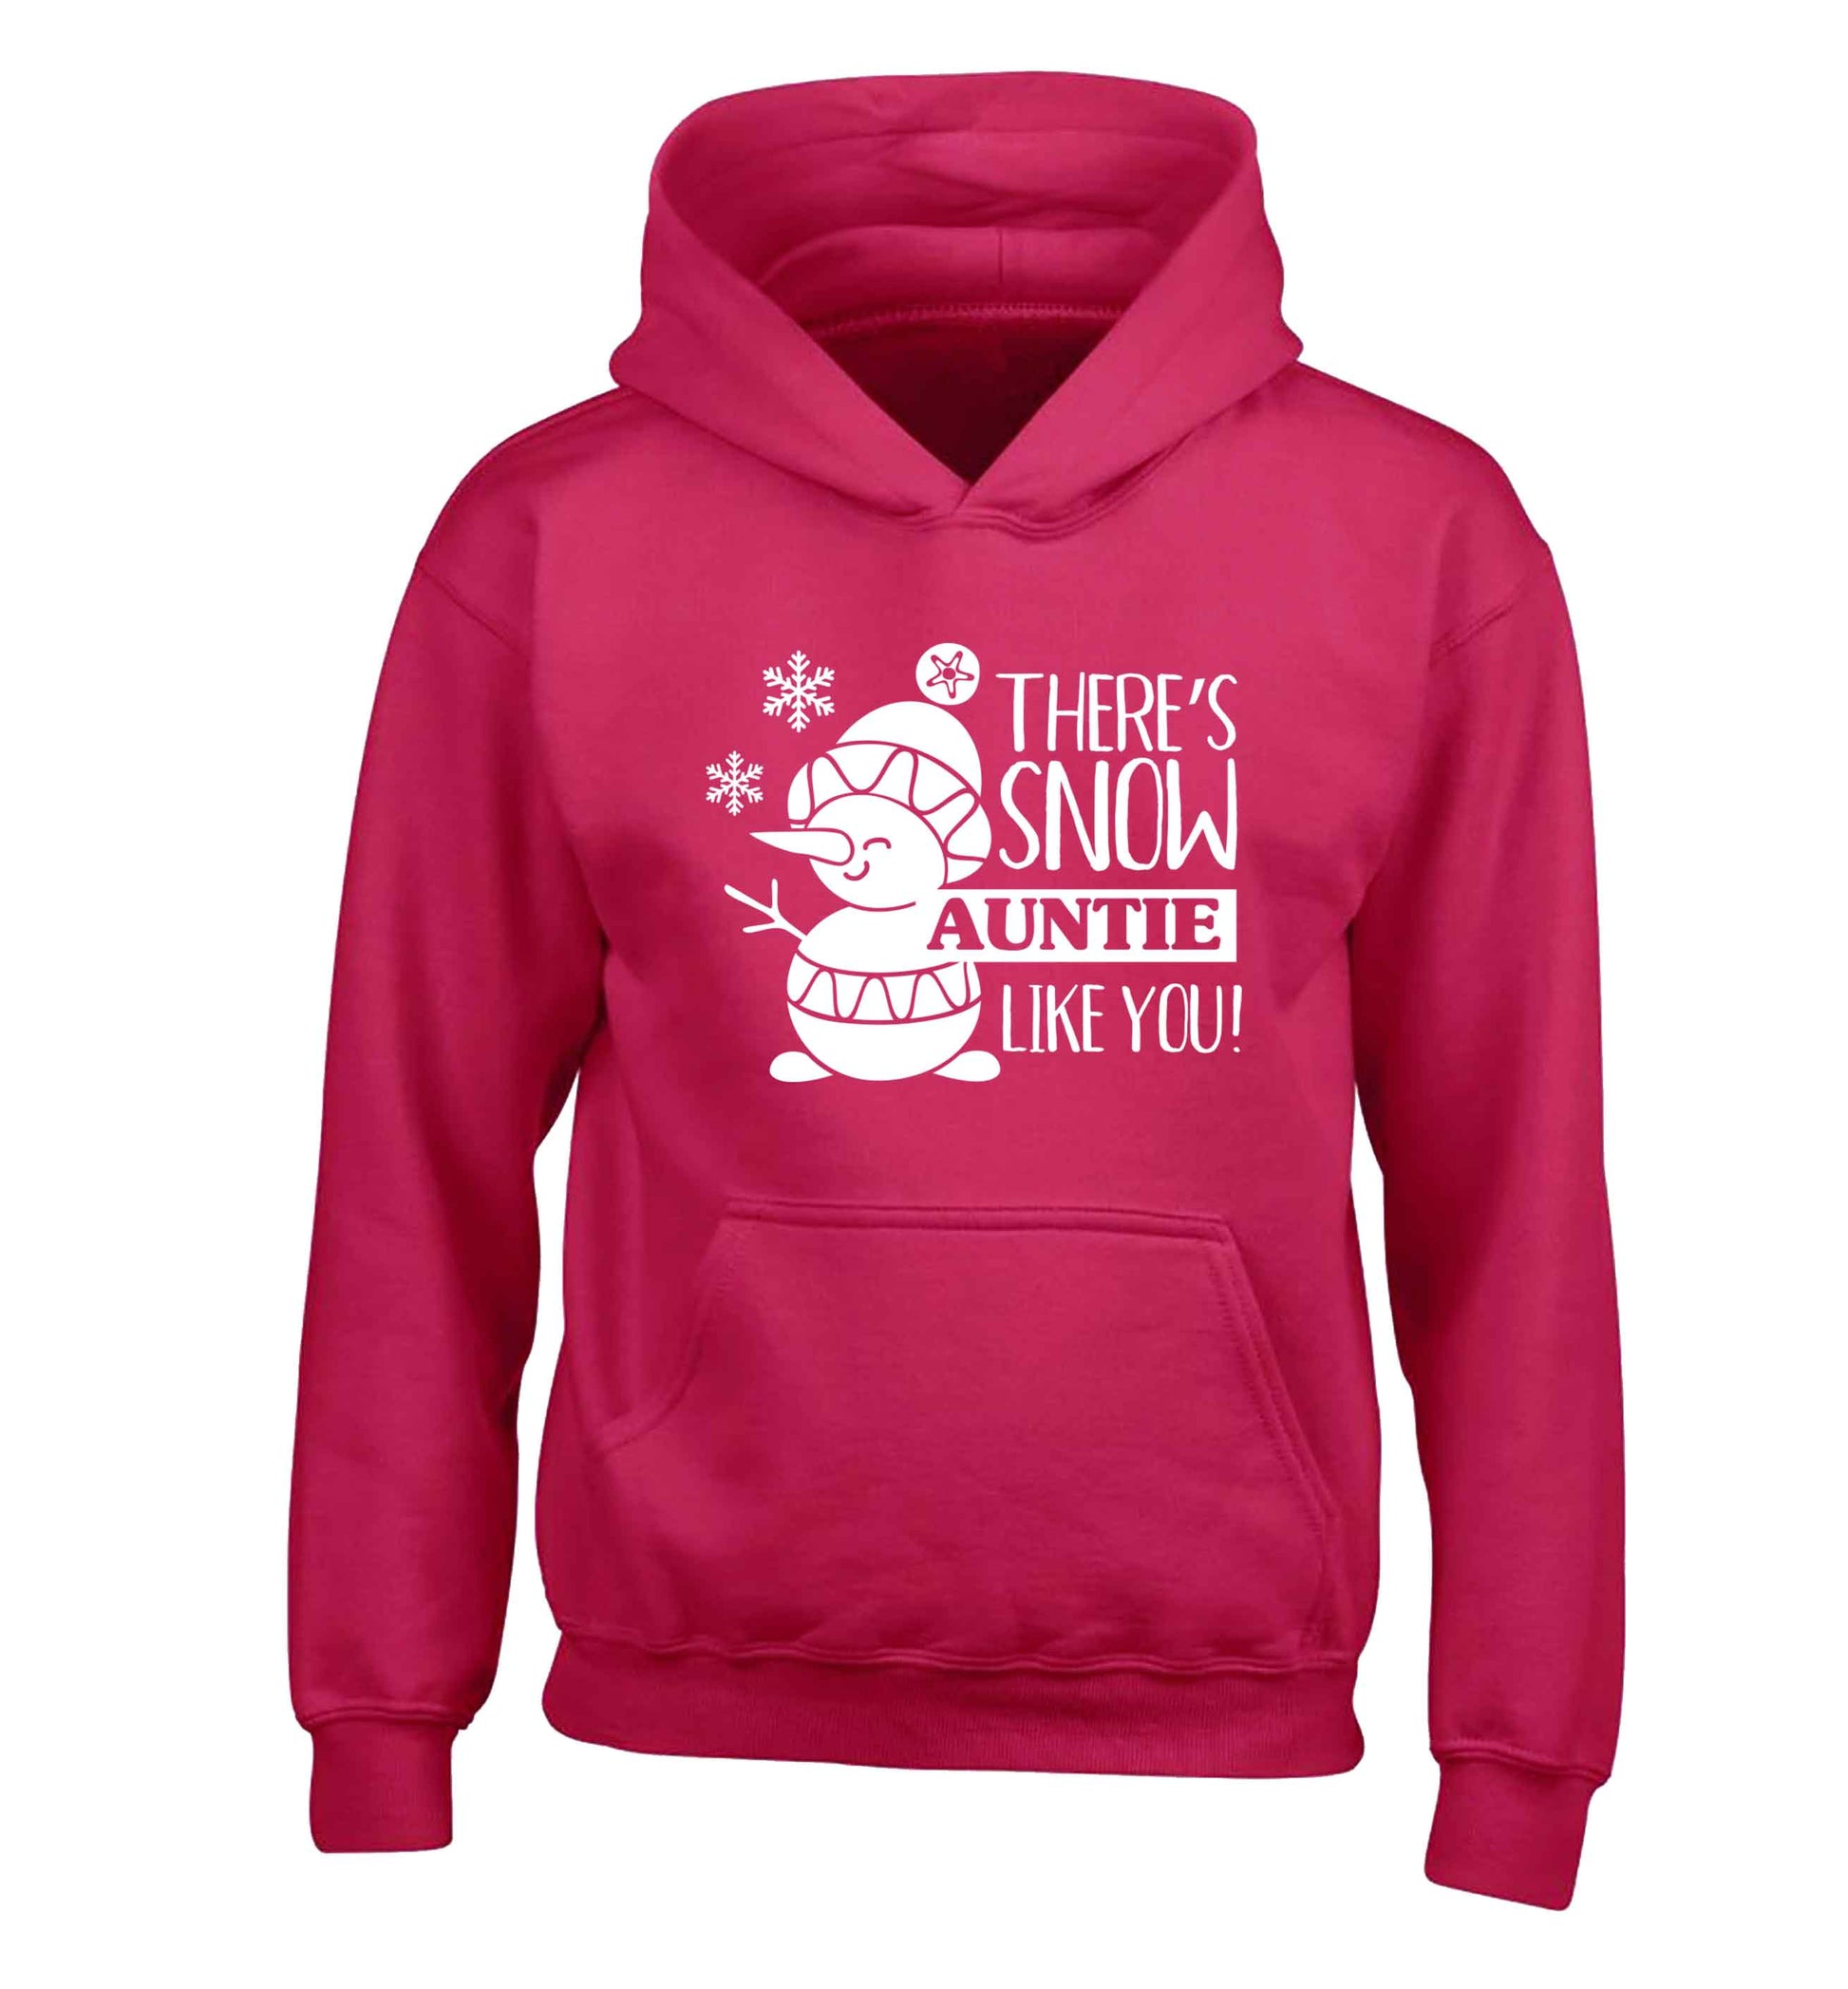 There's snow auntie like you children's pink hoodie 12-13 Years